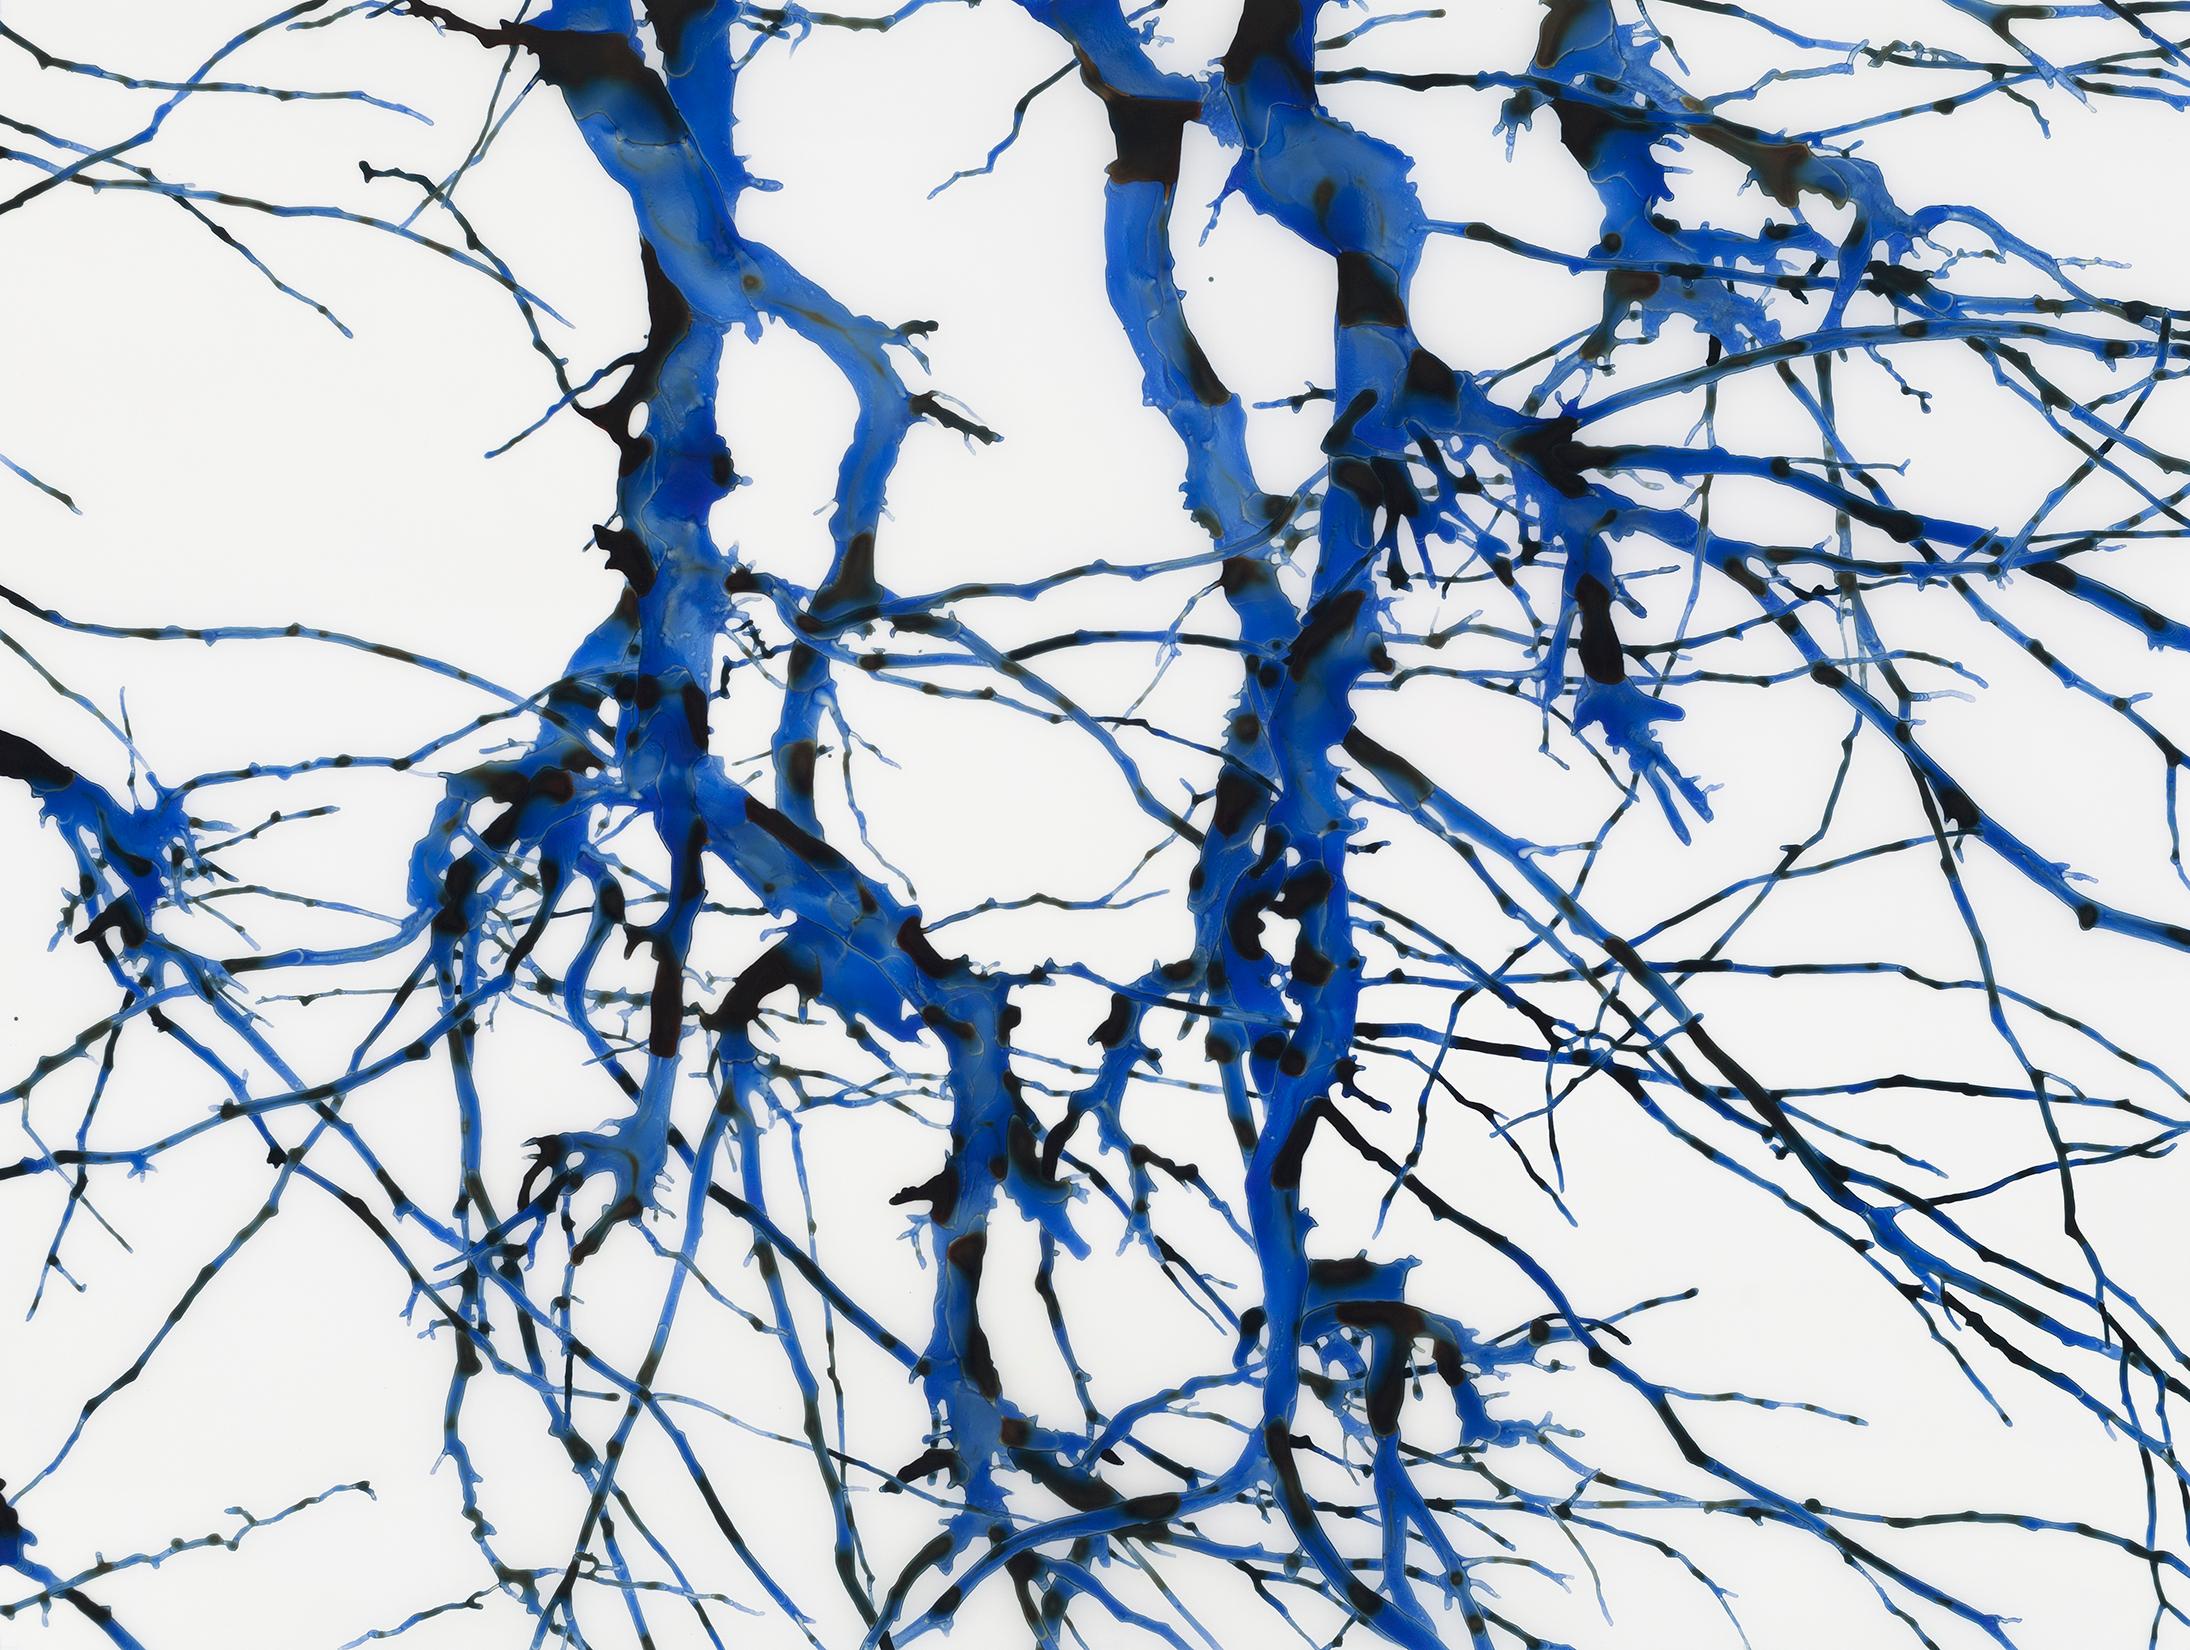 Inazuma m1, Cobalt, Dark Blue Tree Branches on Mylar - Painting by Jackie Battenfield